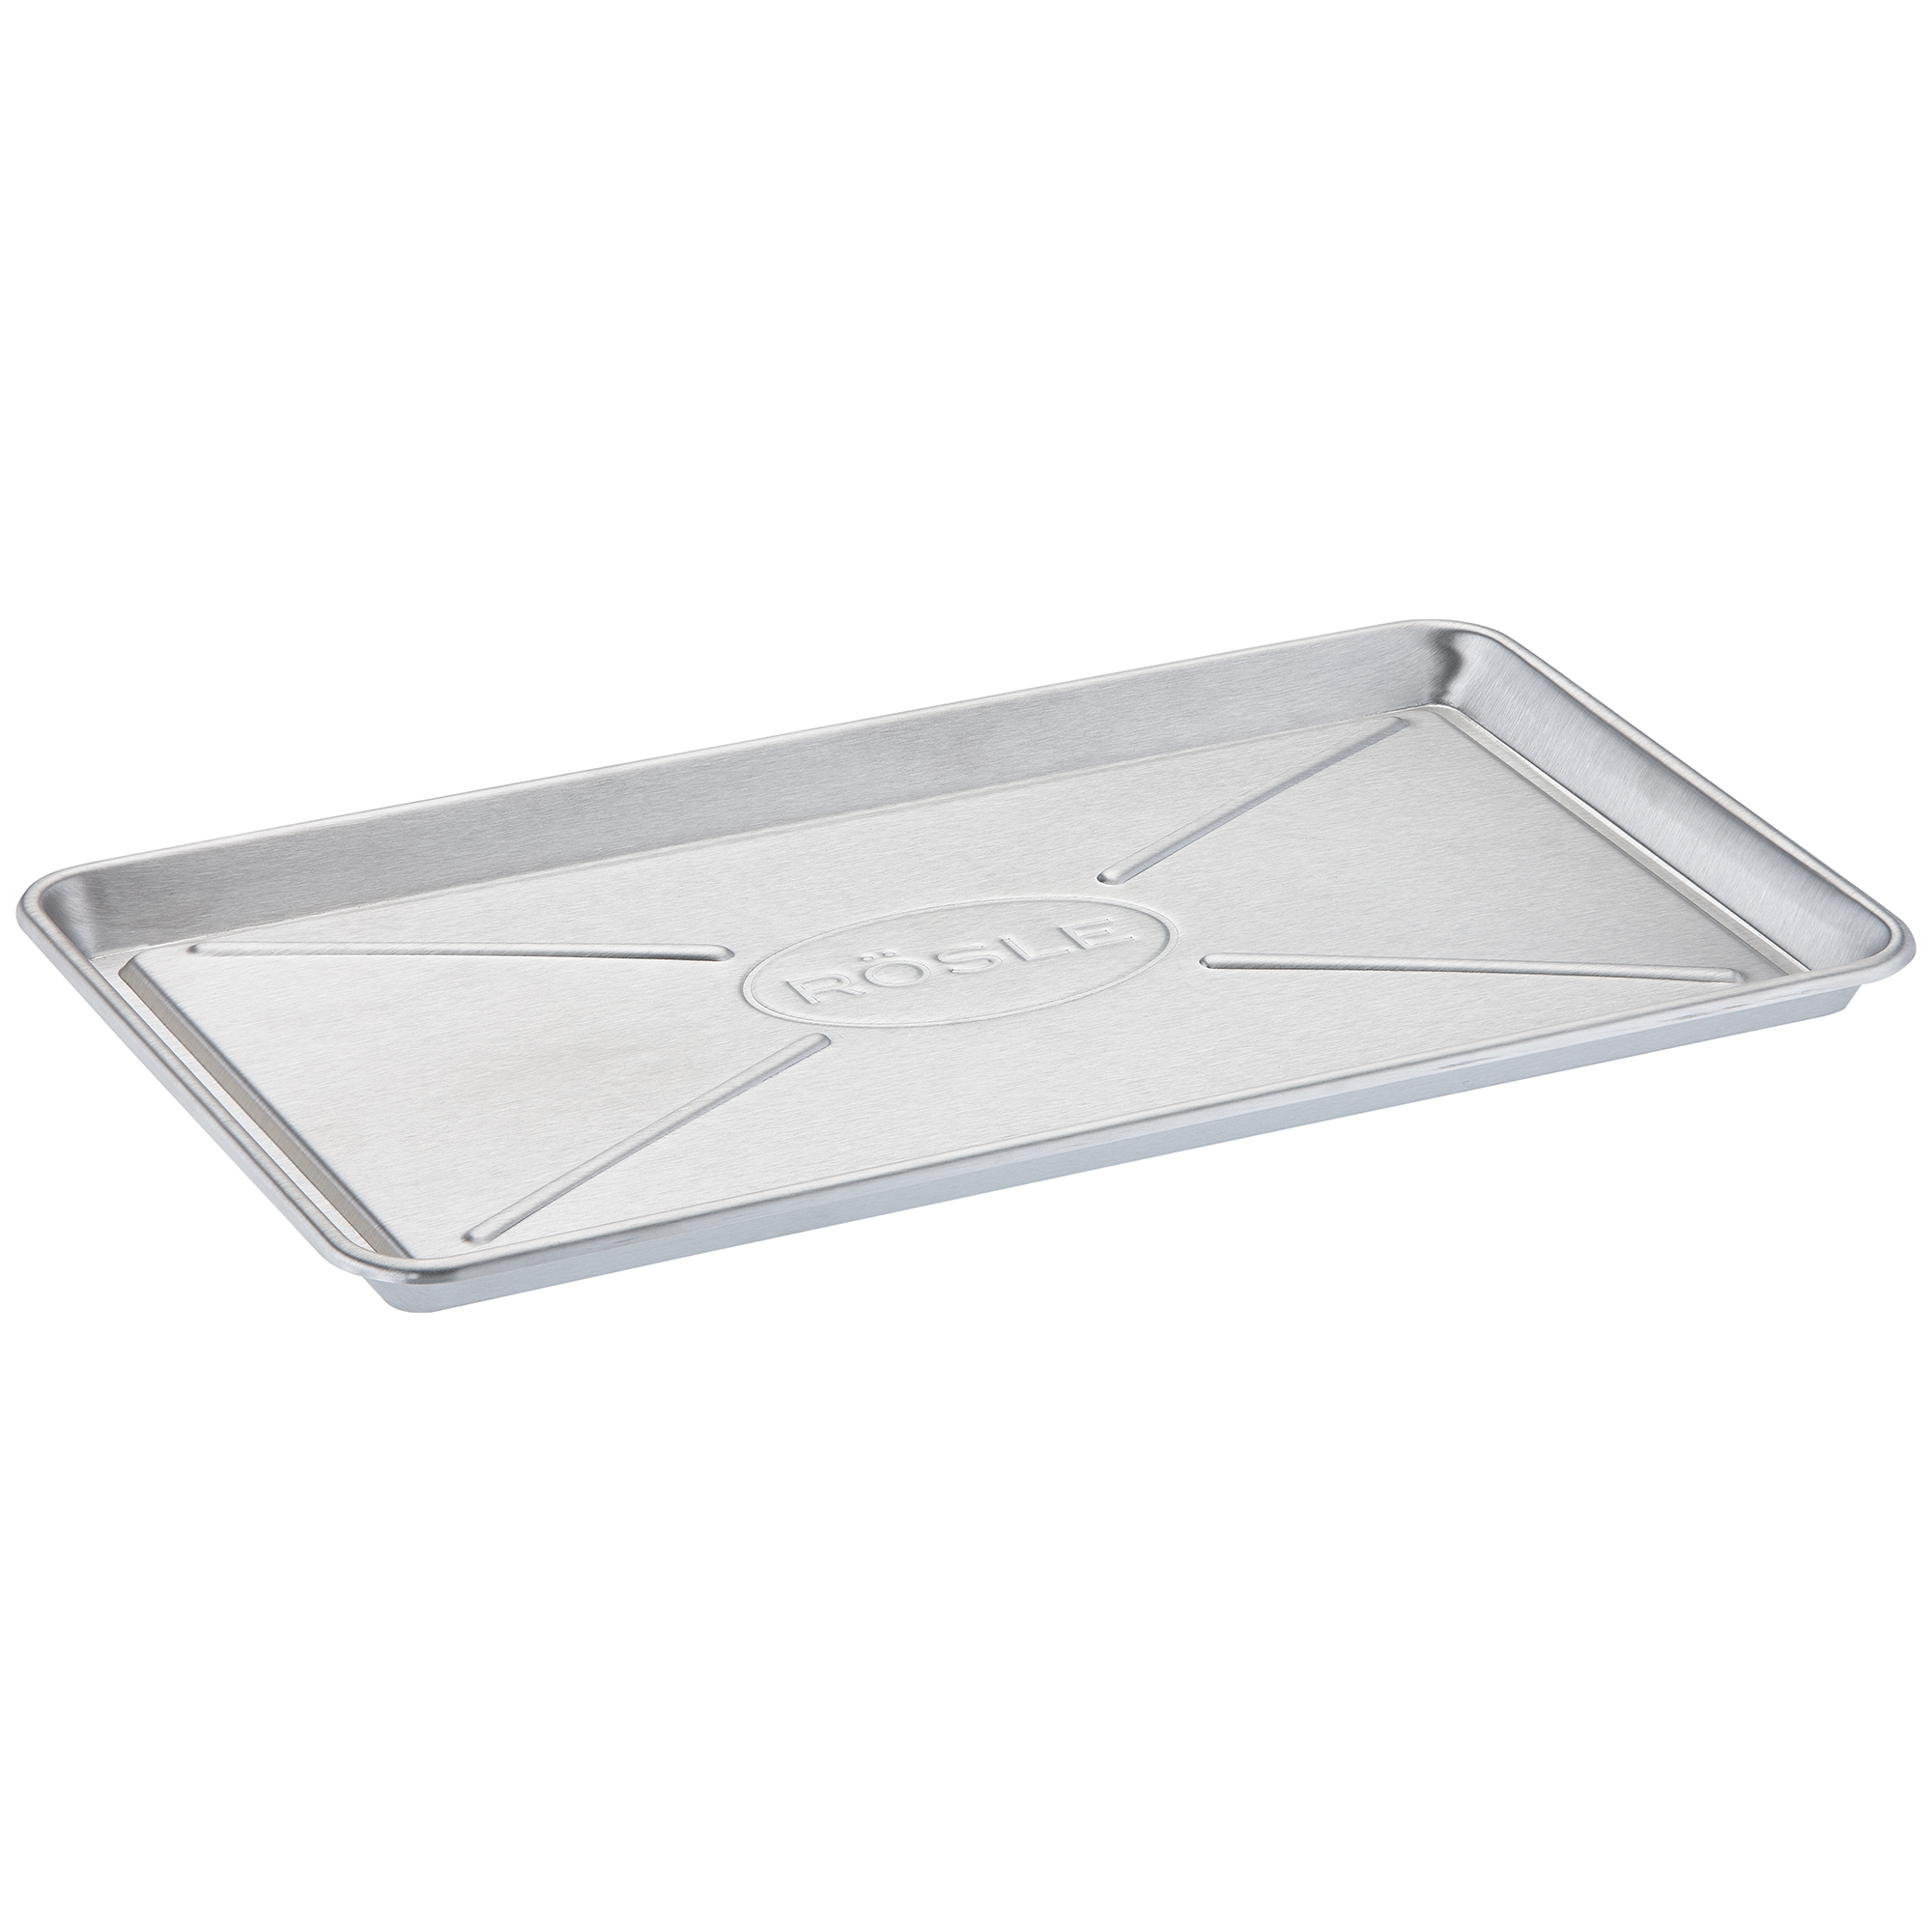 Stainless Steel Universal Pan 36 x 20 cm | 14.2 x 7.9 in.